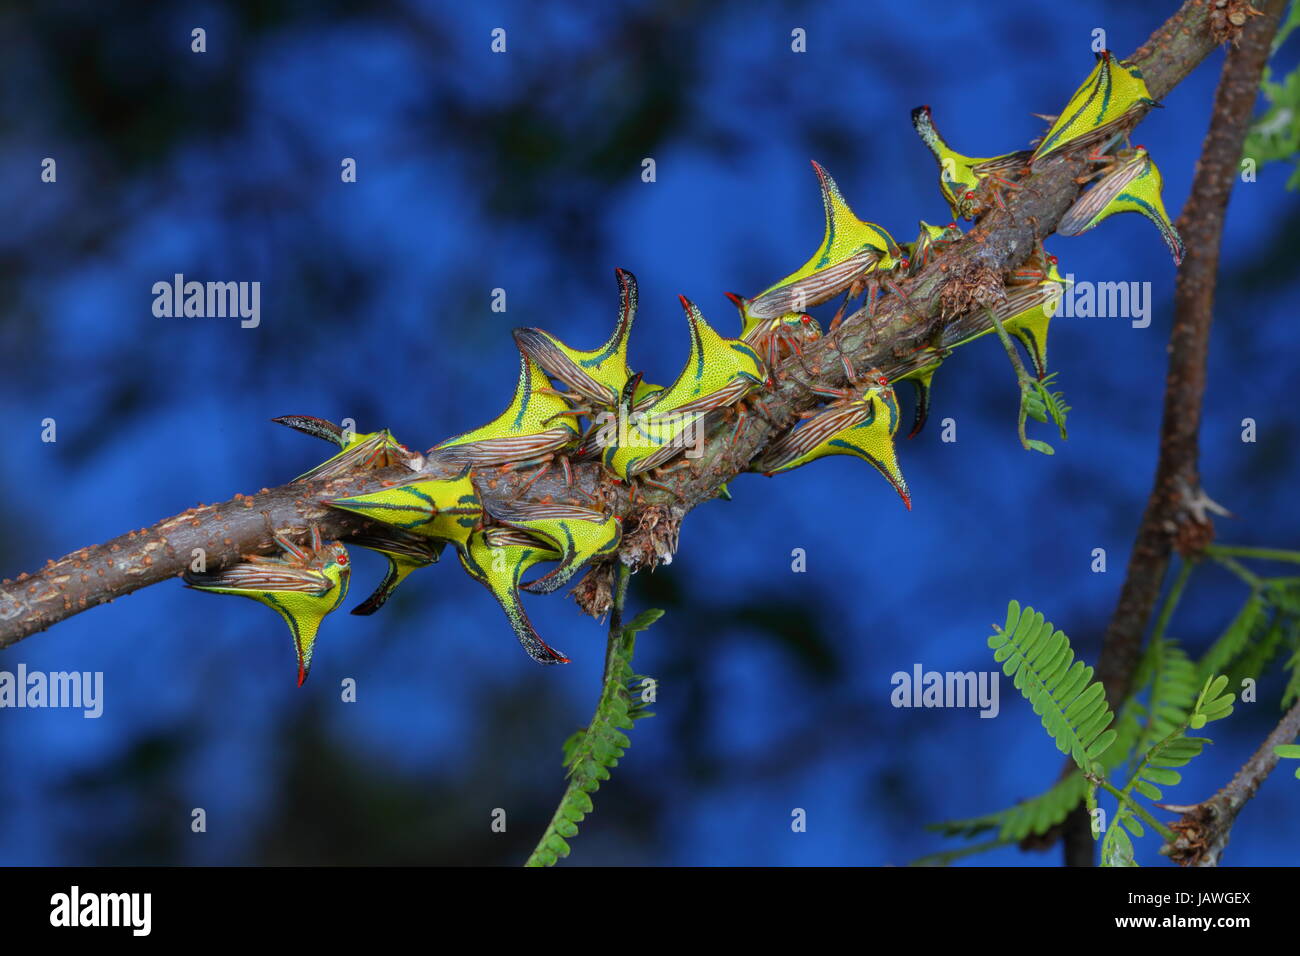 Thorn bugs, Umbonia crassicornis, on a palm frond. Stock Photo